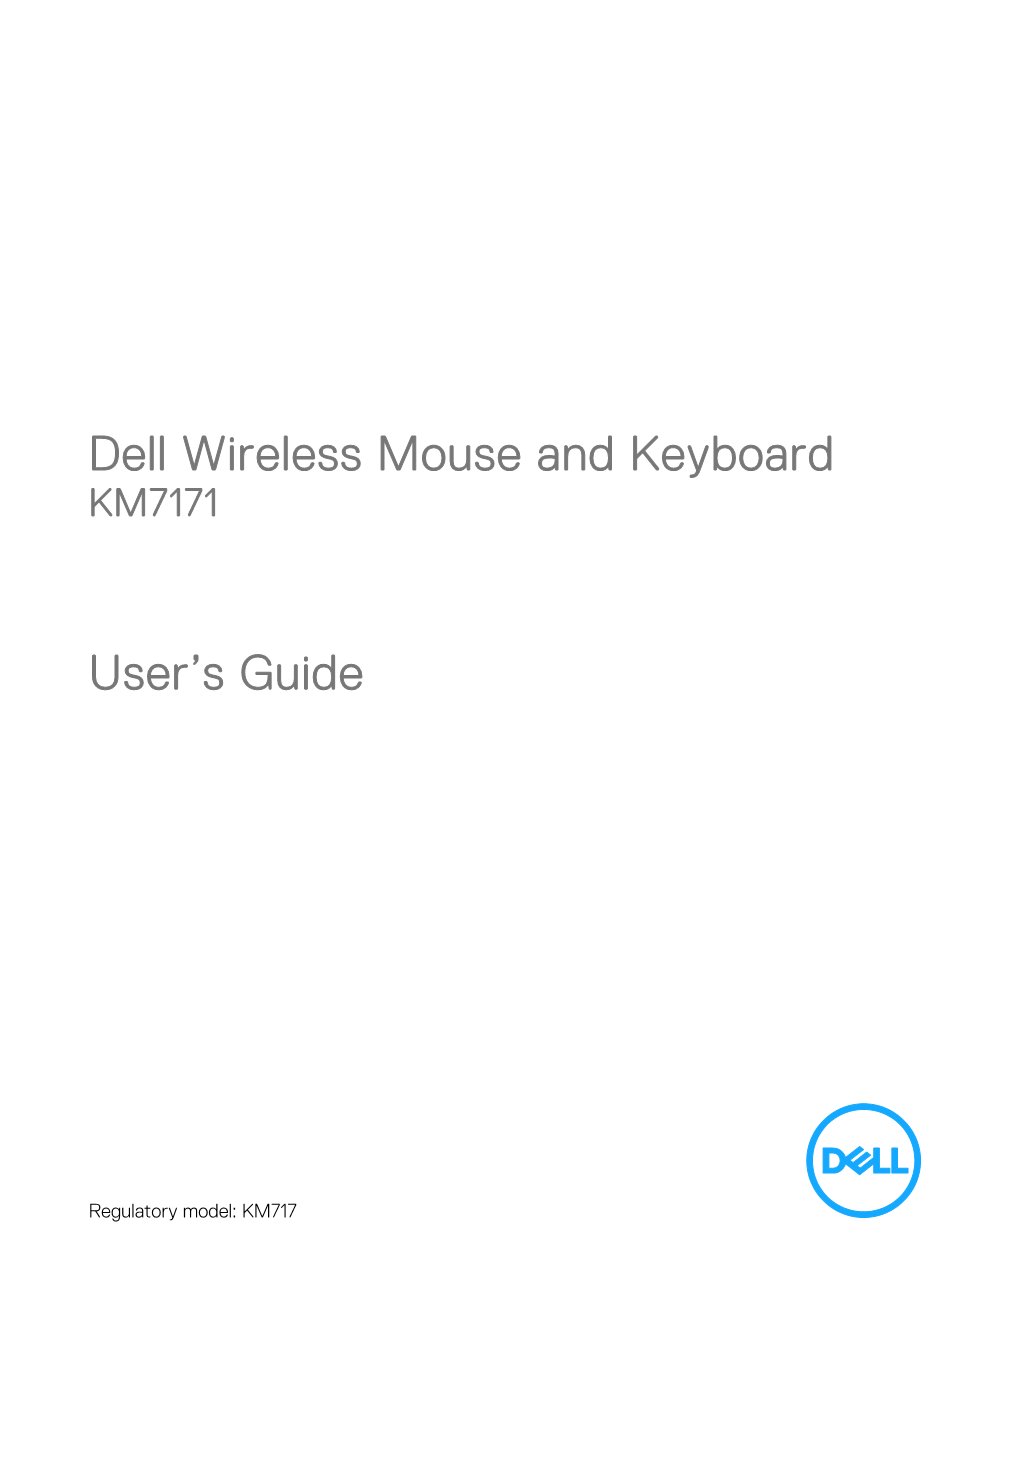 Dell Premier Wireless Keyboard and Mouse KM717 User's Guide